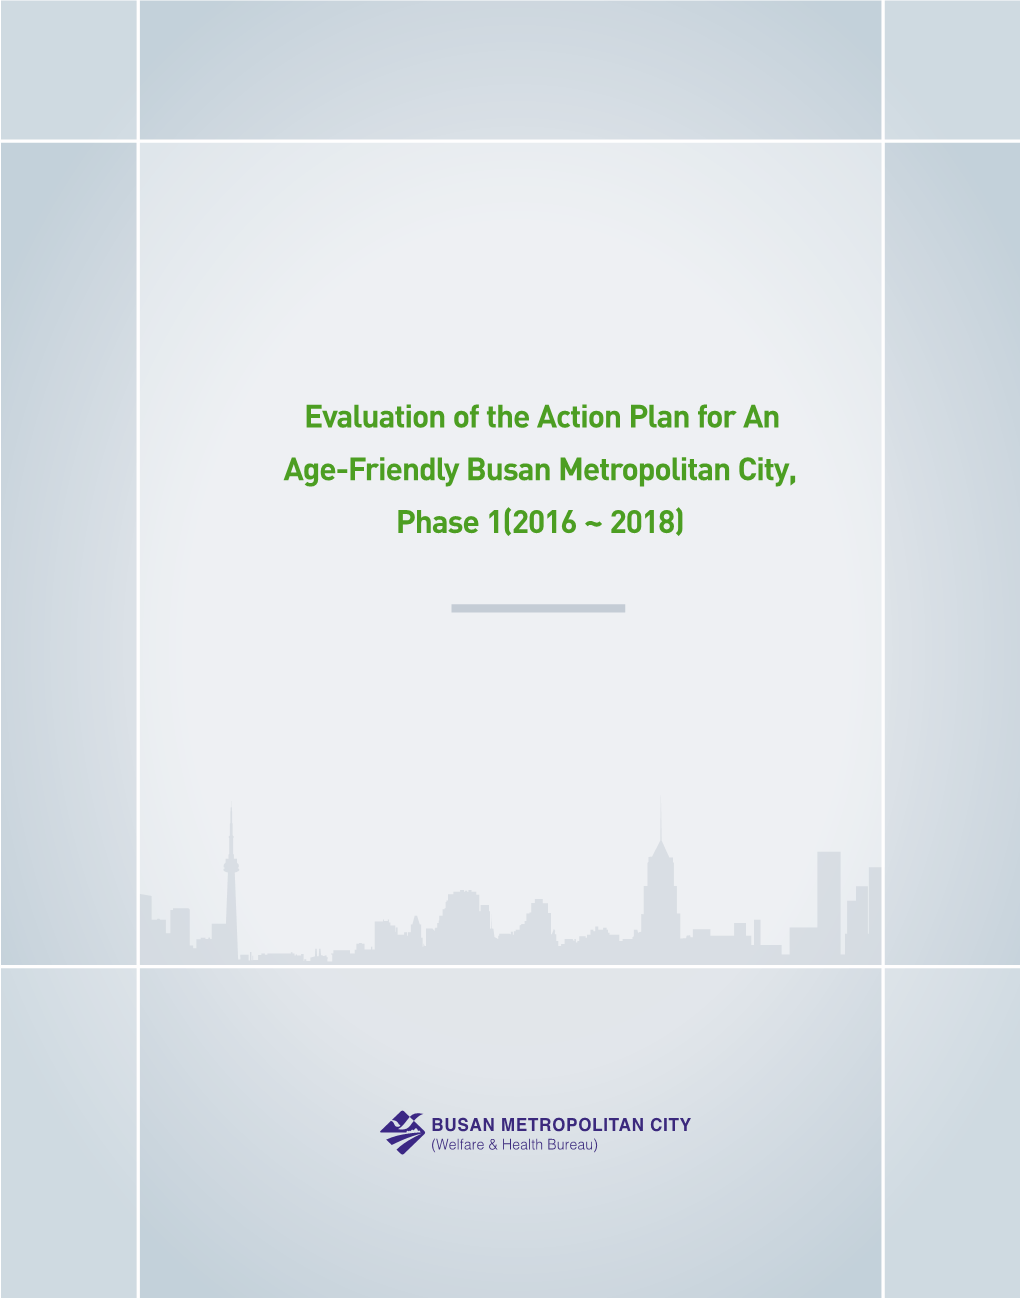 Evaluation of the Action Plan for an Age-Friendly Busan Metropolitan City, Phase 1(2016 ~ 2018)